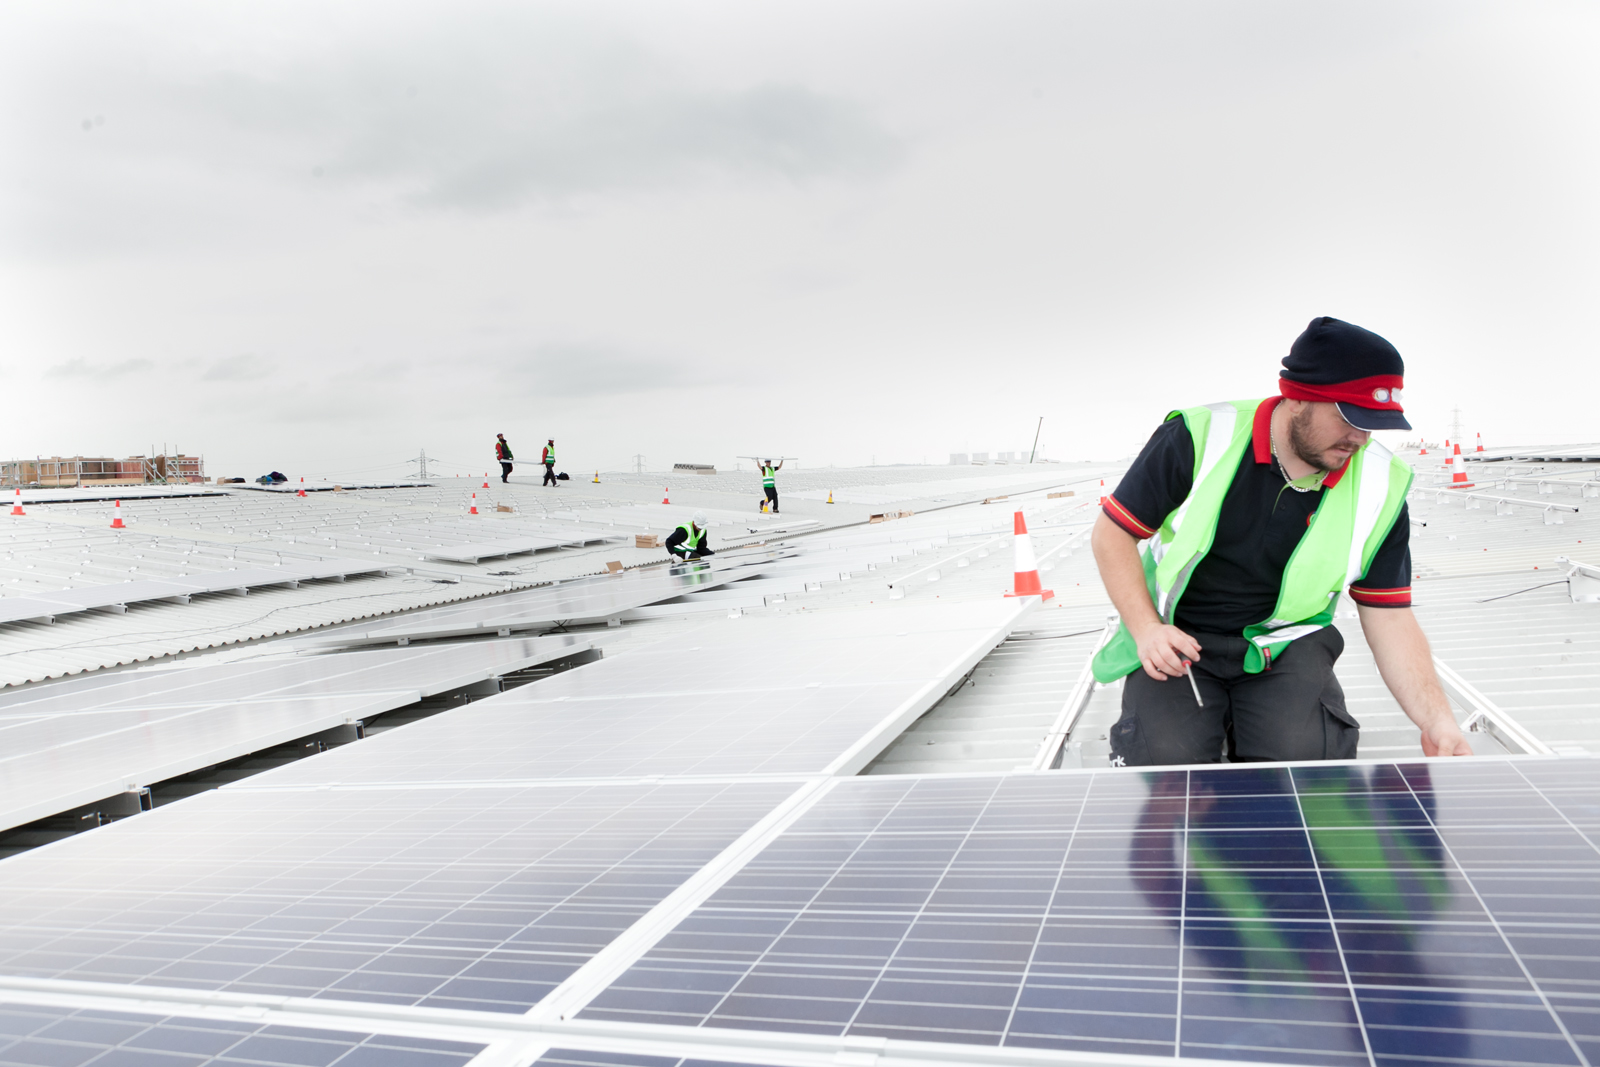 Solar array Castle Donington covering a huge roof expanse with worker in foreground and group of workers in distance